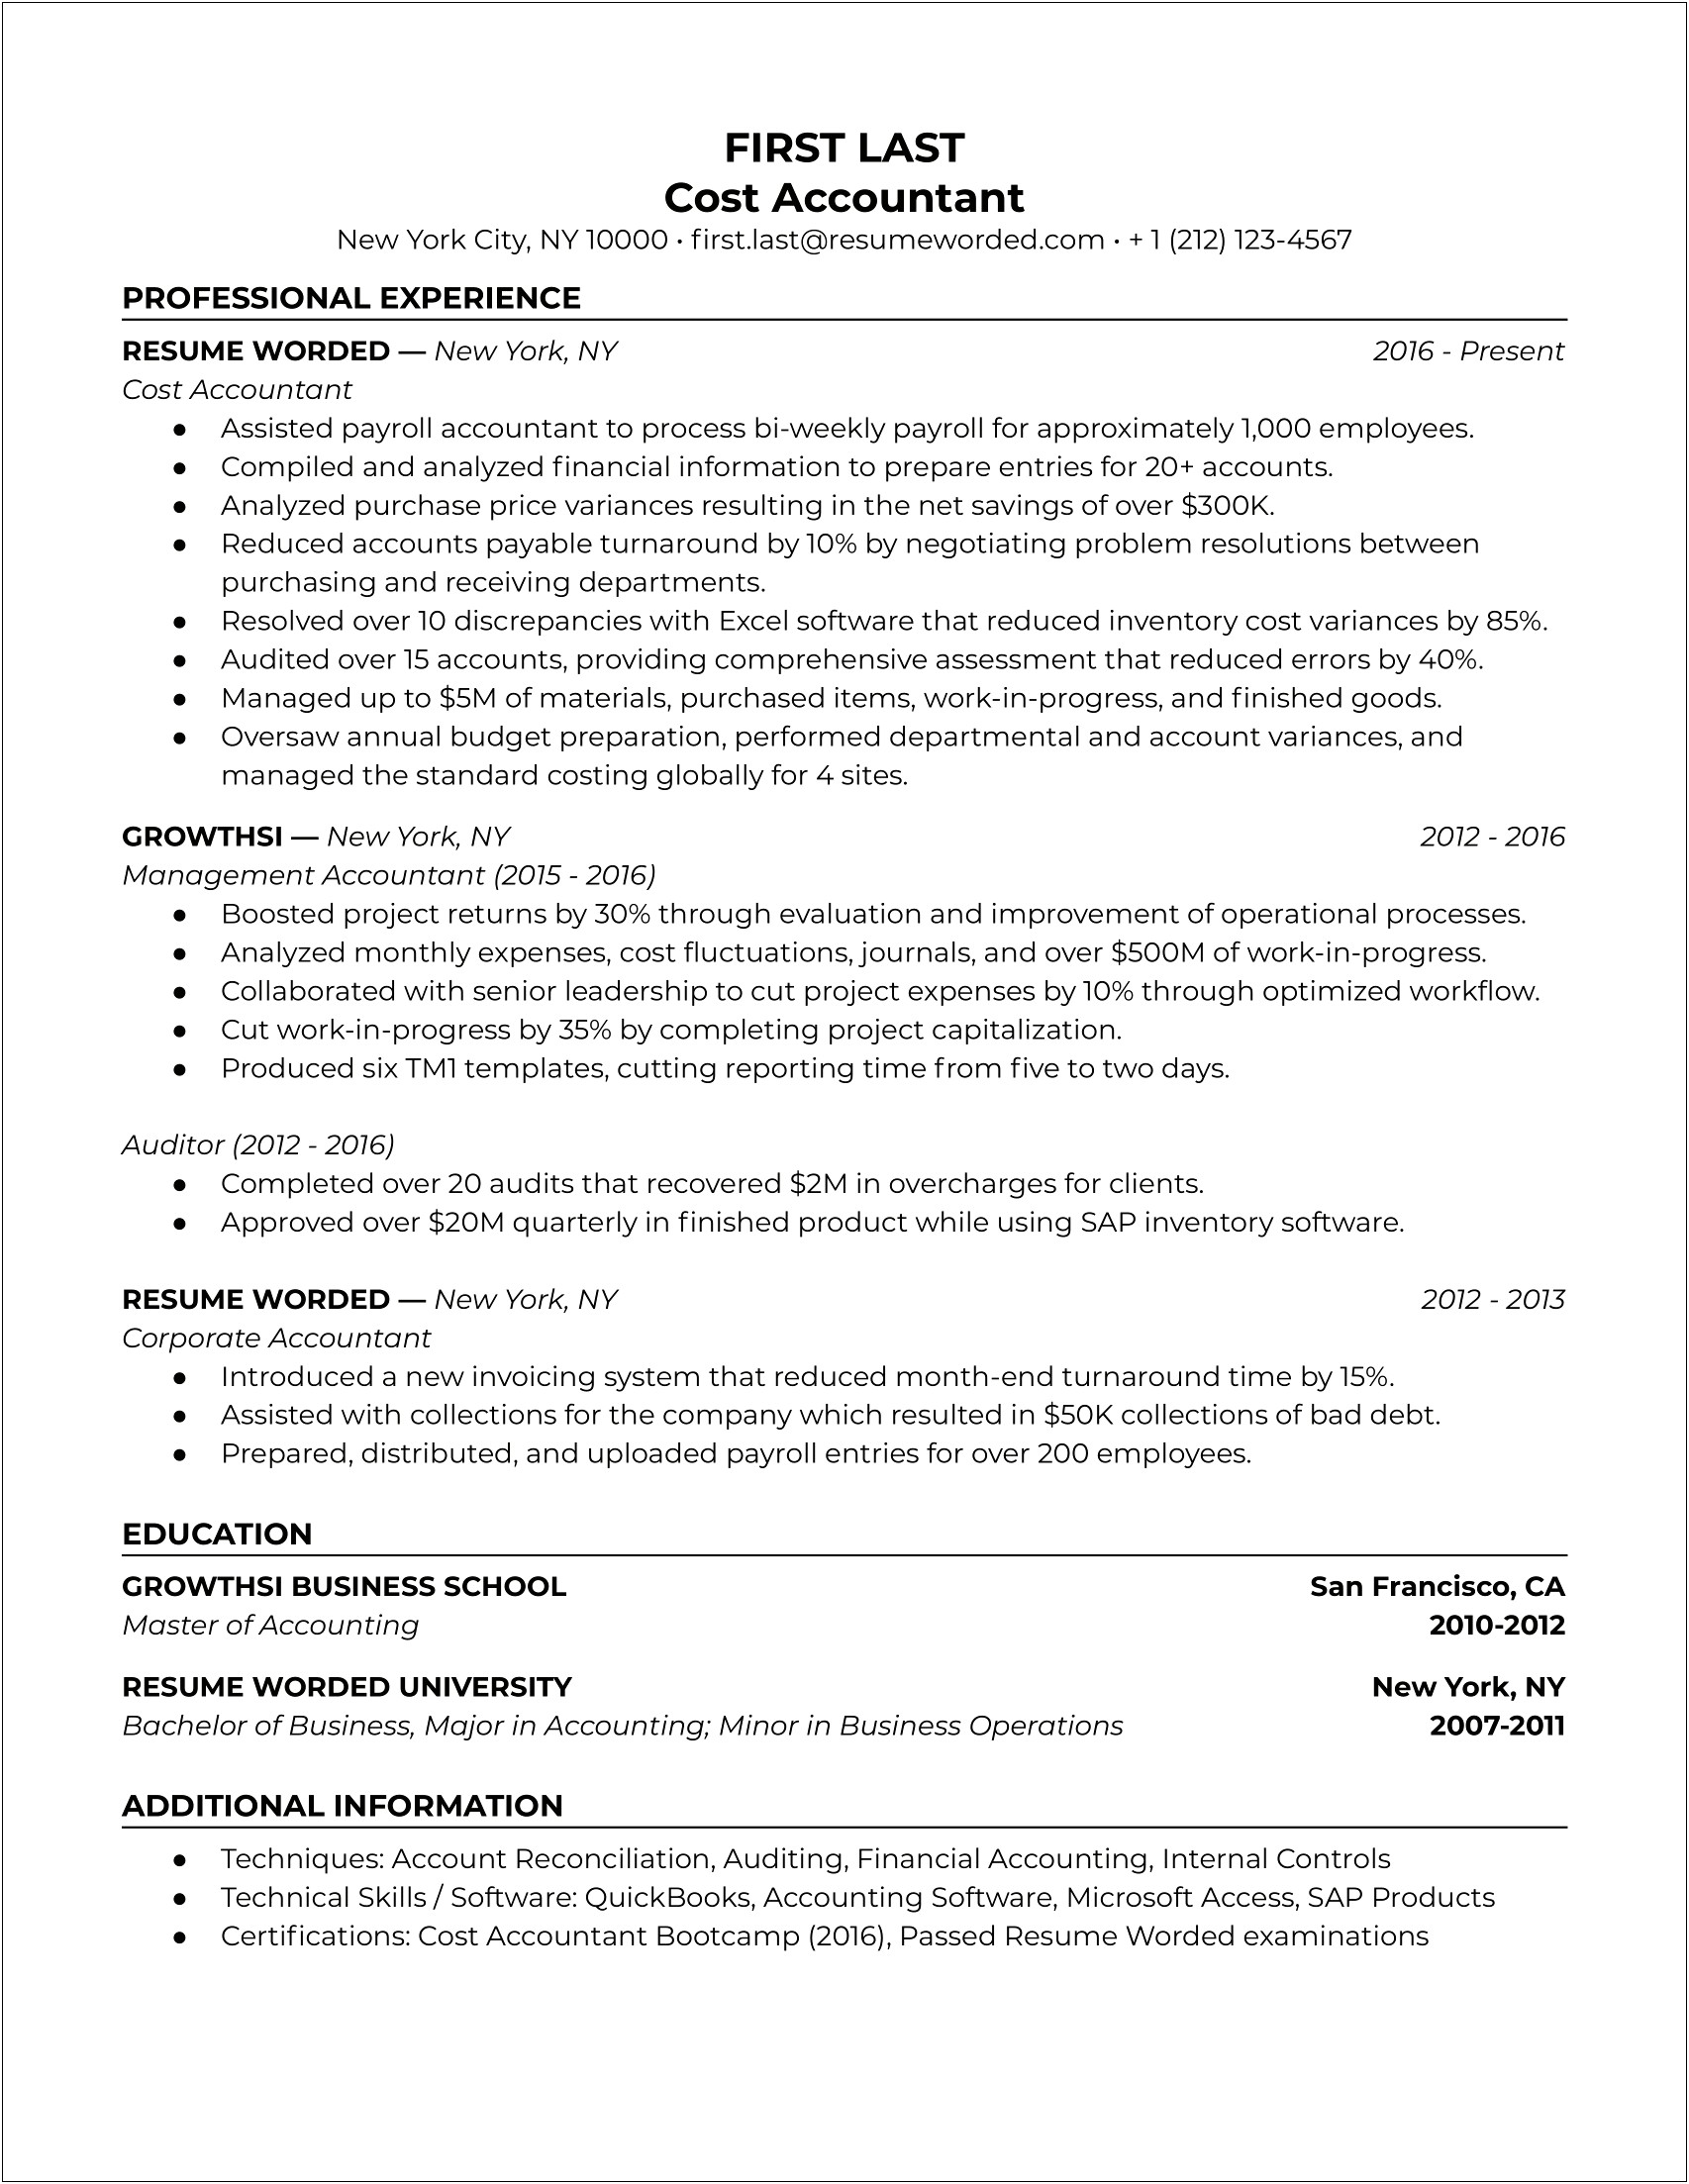 The Best Resume For Entry Level Accounting